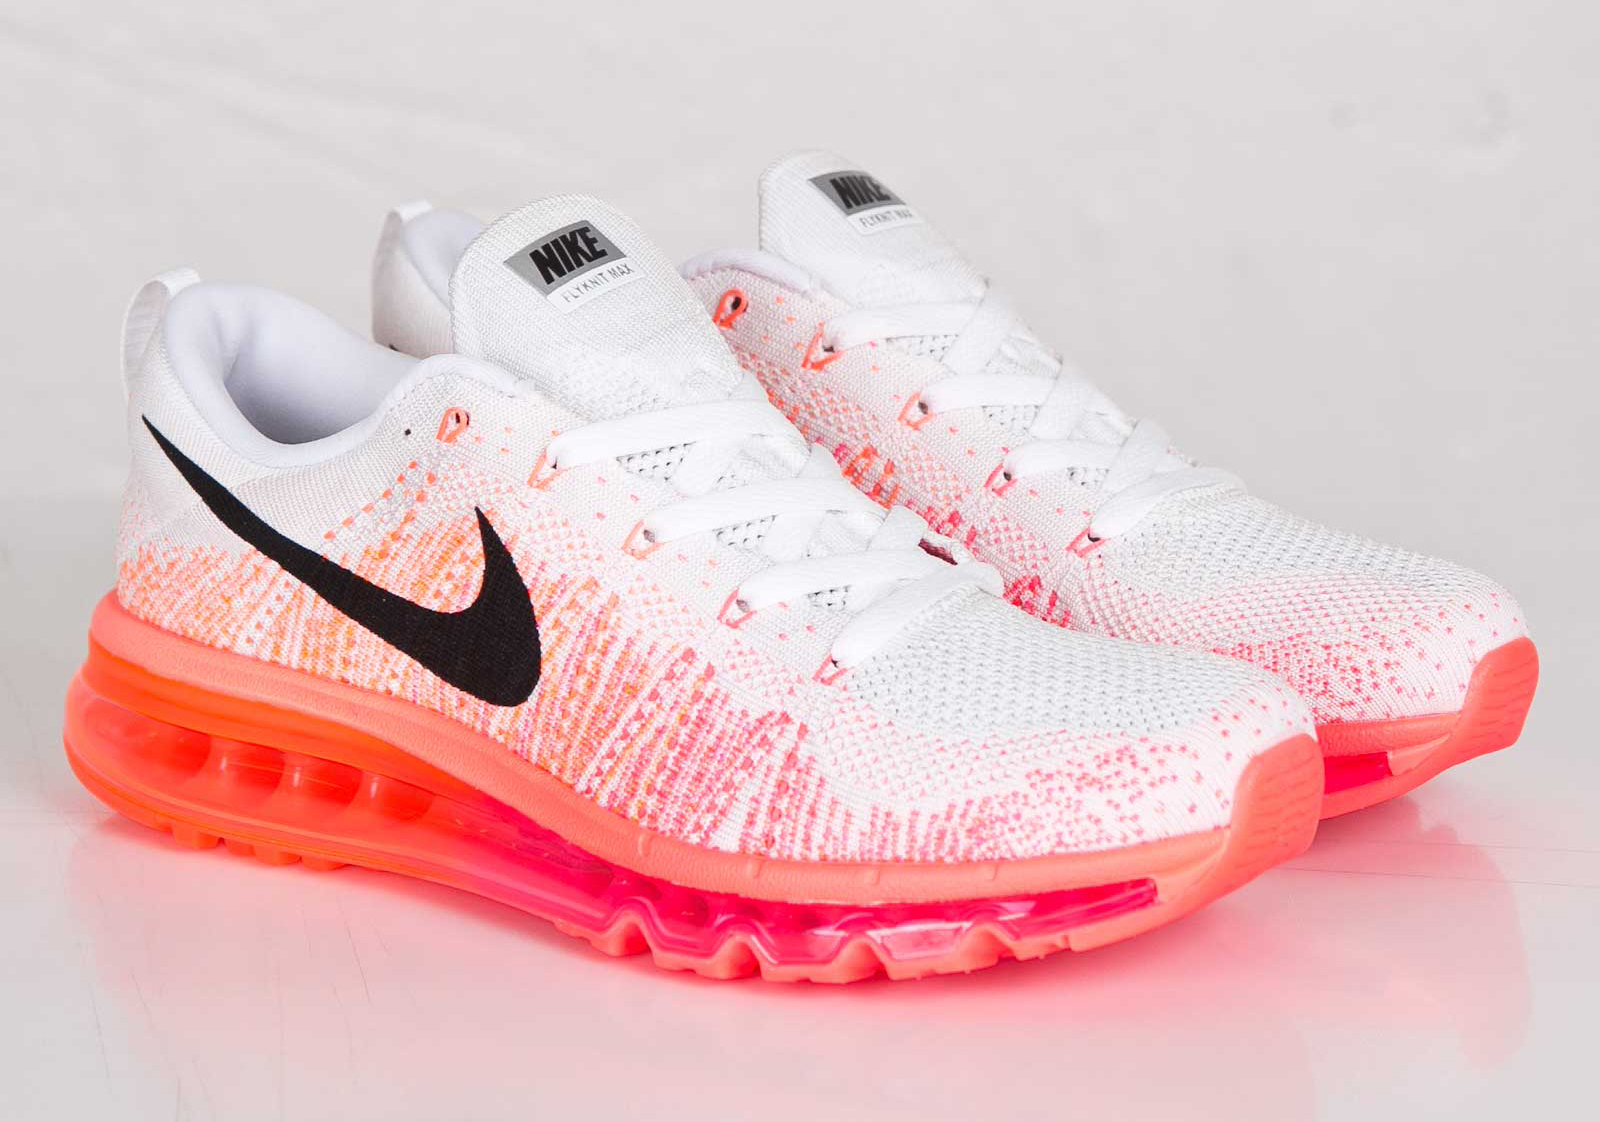 Nike Flyknit Air Max - White - Hyper Punch - Bright Magenta